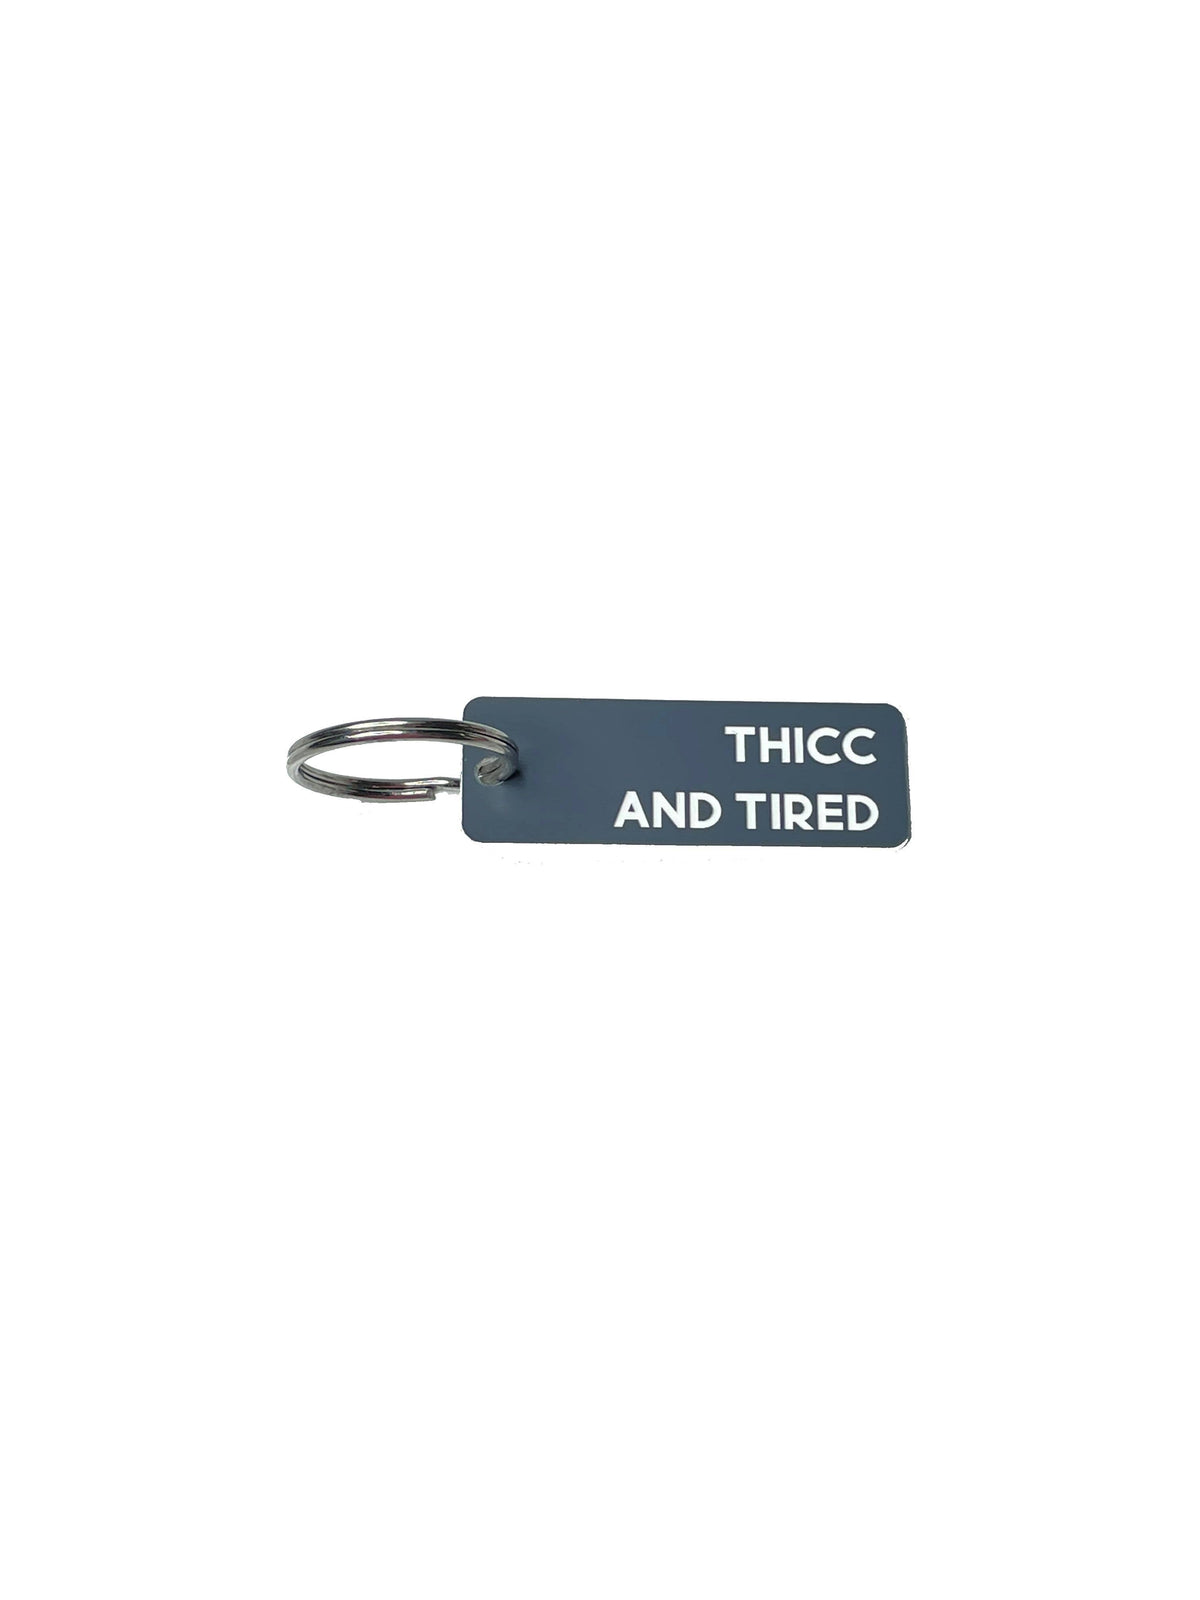 Thicc and Tired - Acrylic Key Tag: Gray/White